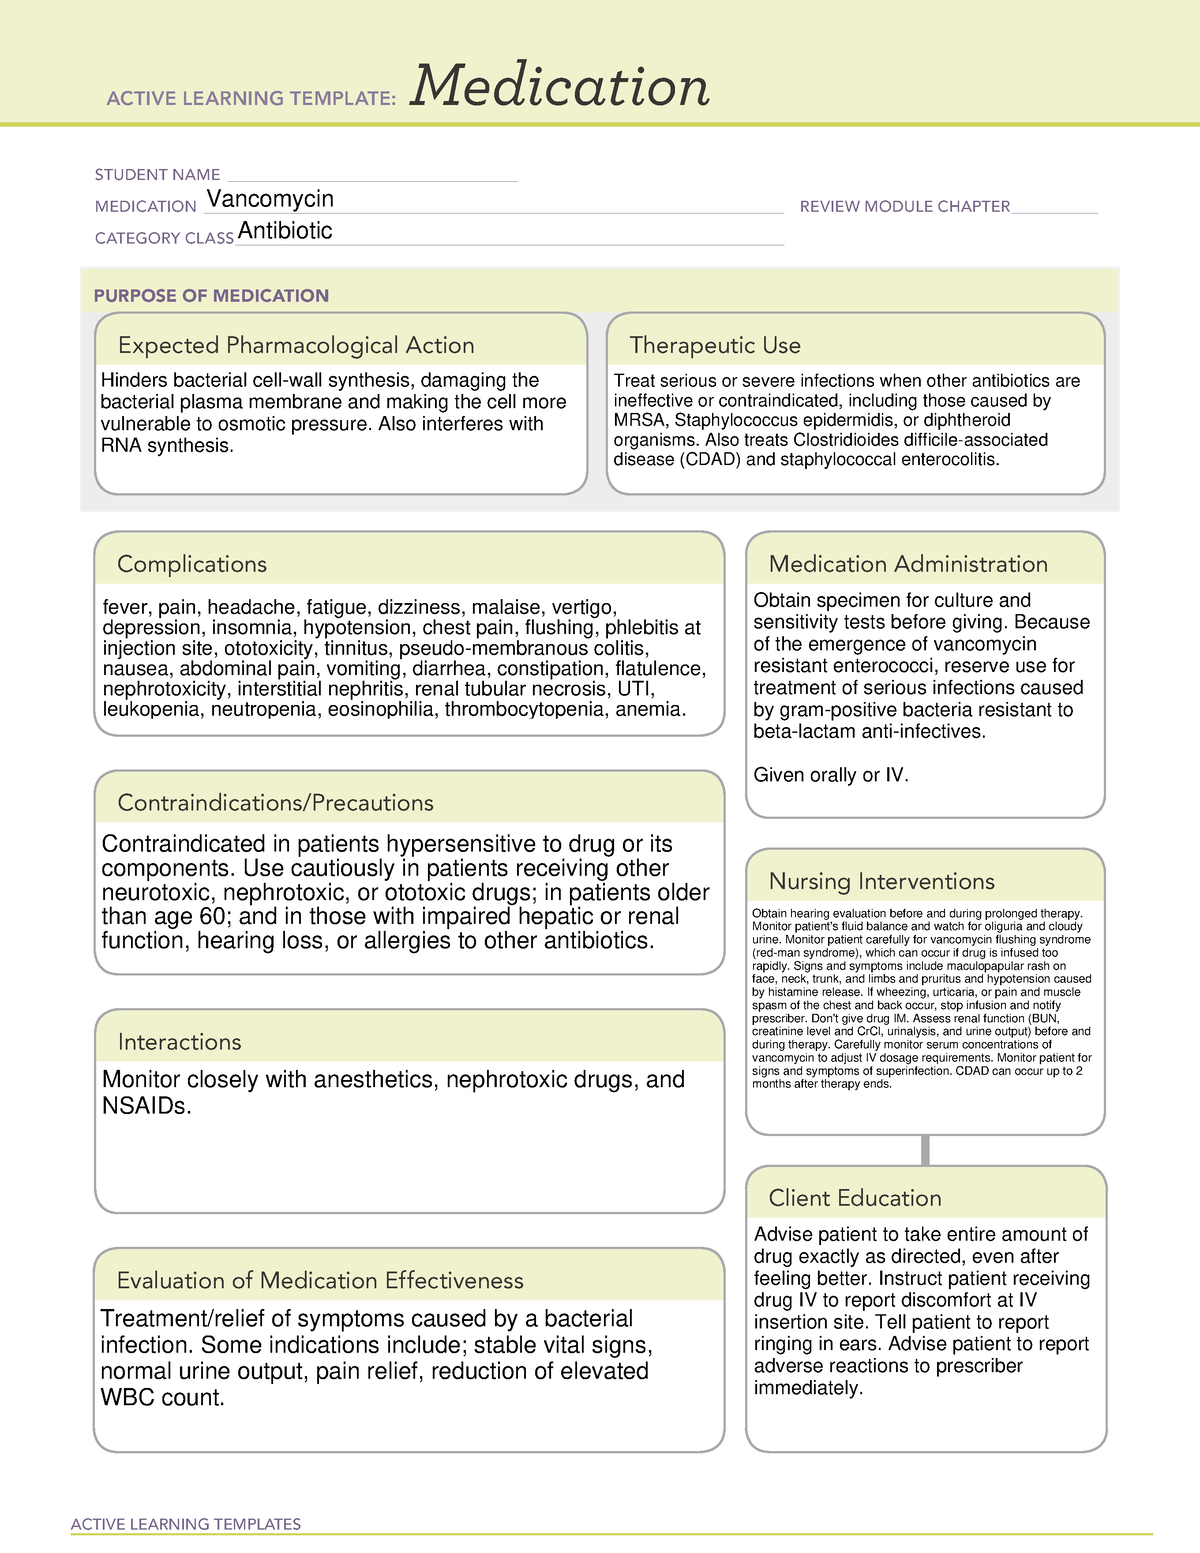 ati-medication-template-vancomycin-filled-in-active-learning-templates-medication-student